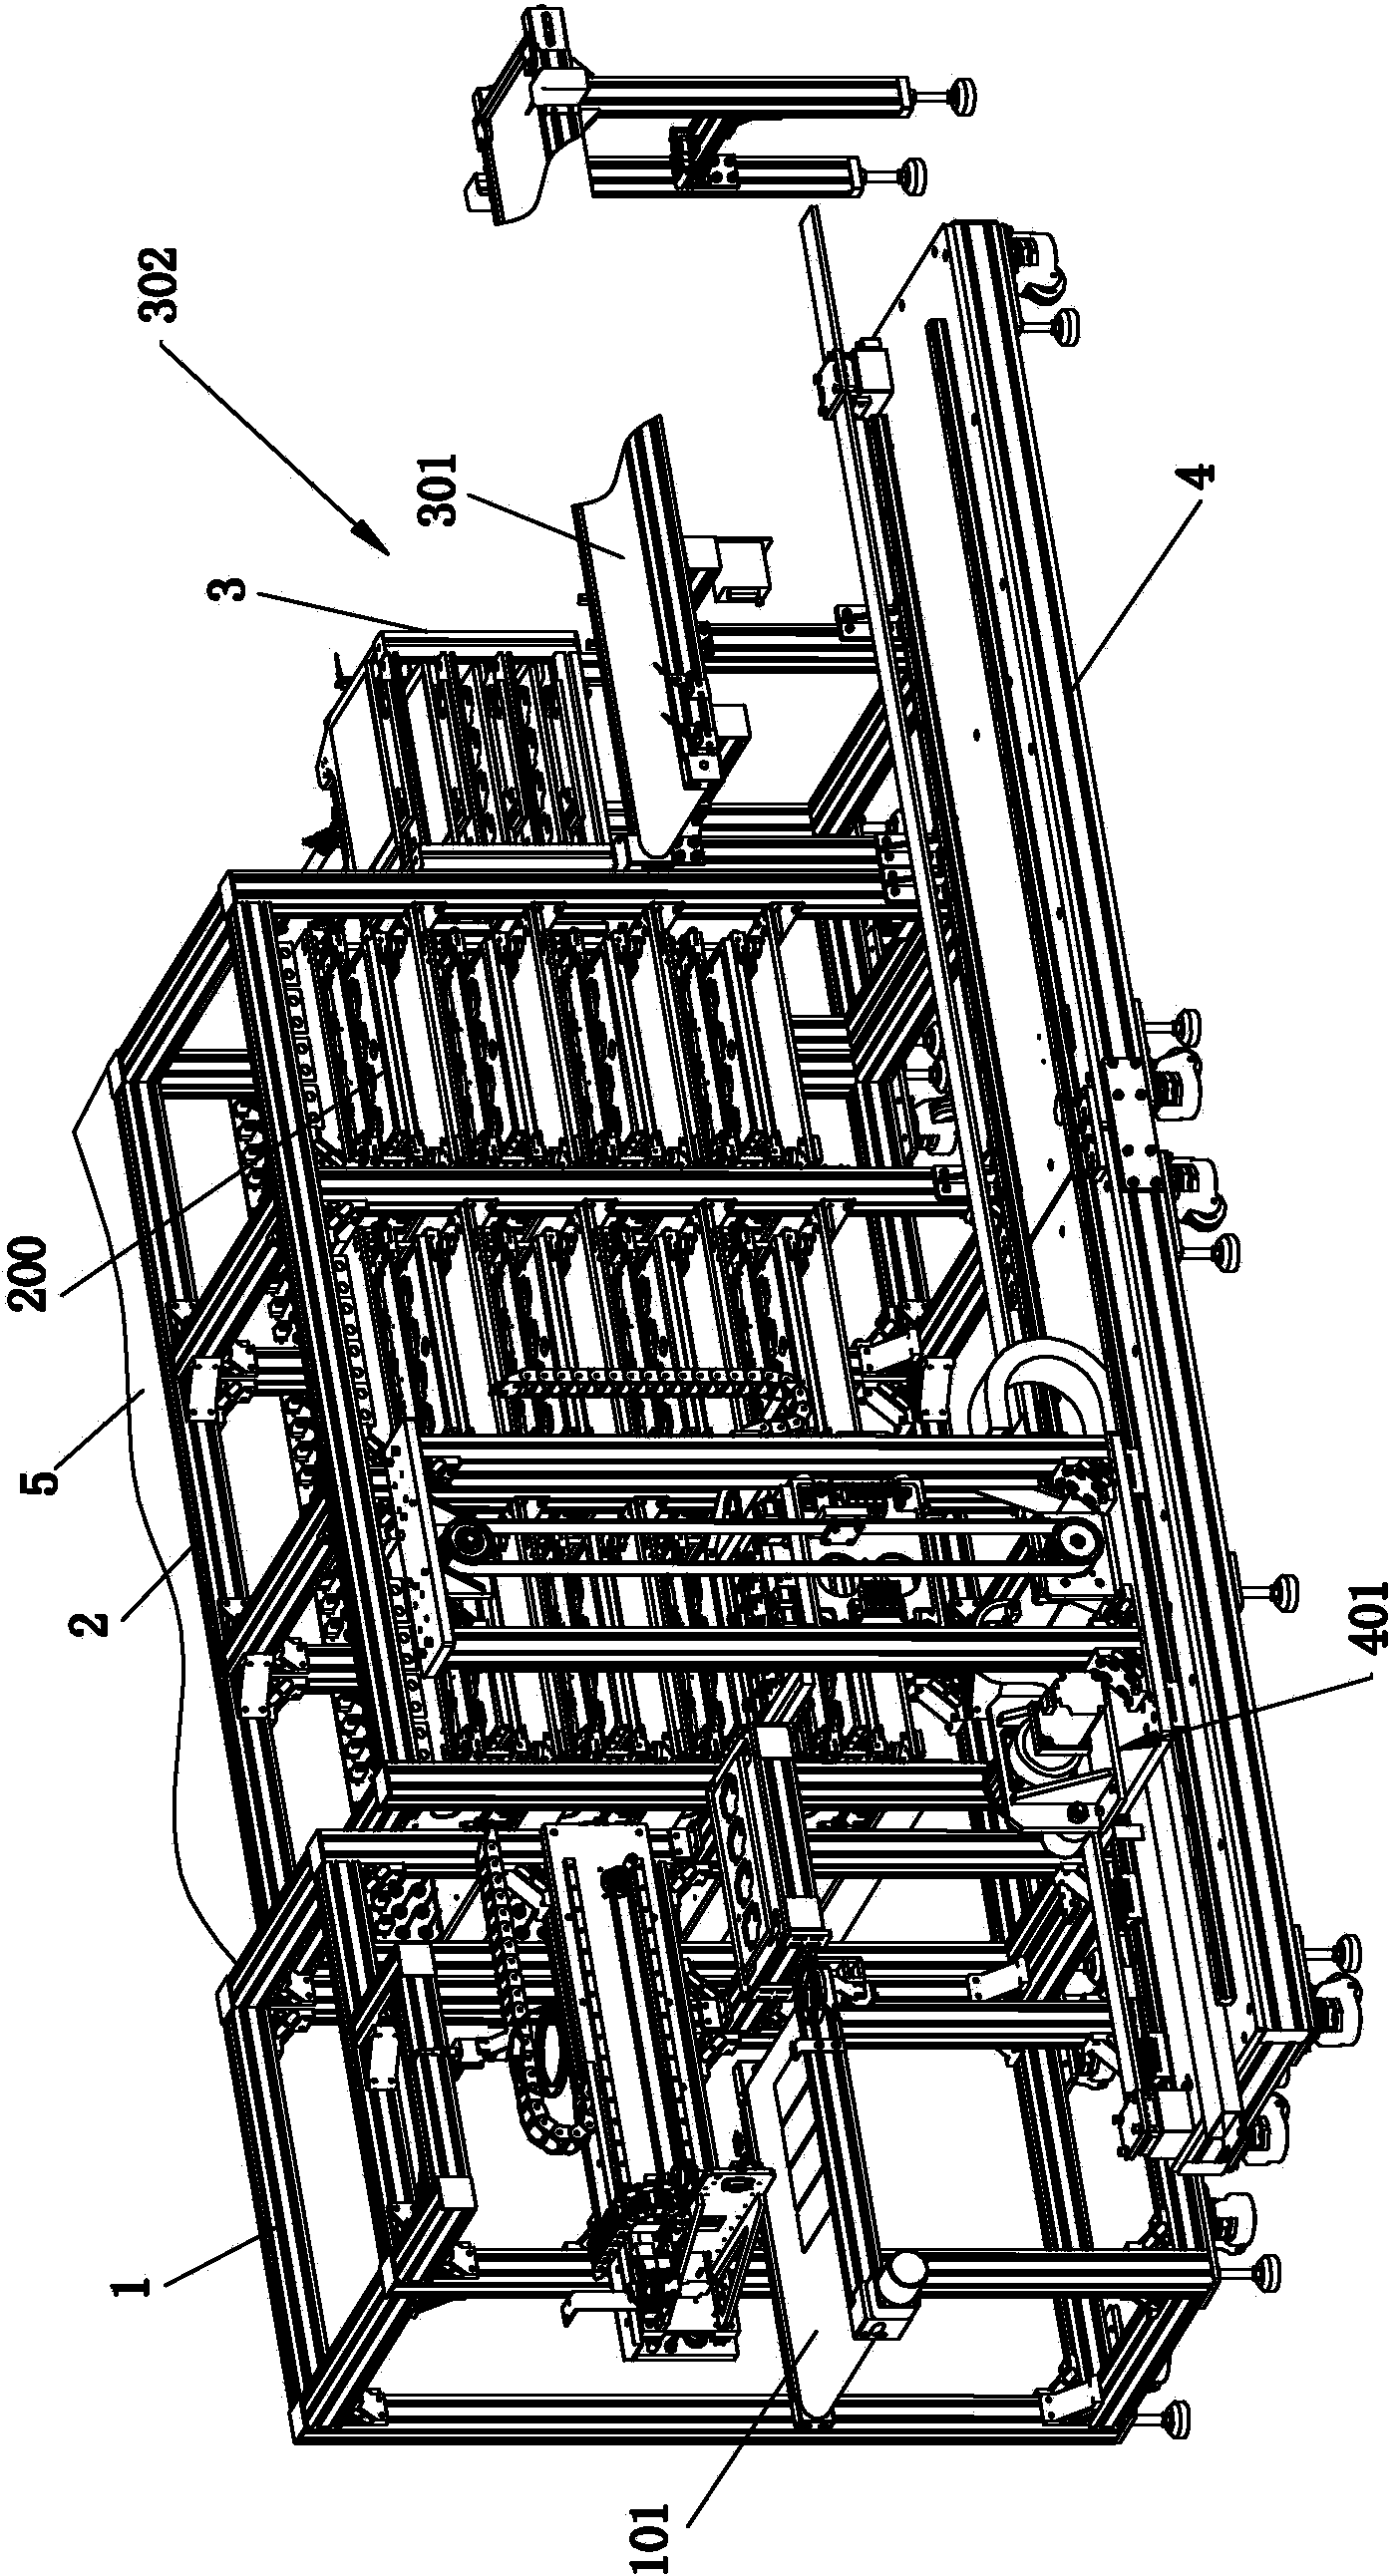 Full-automatic test device